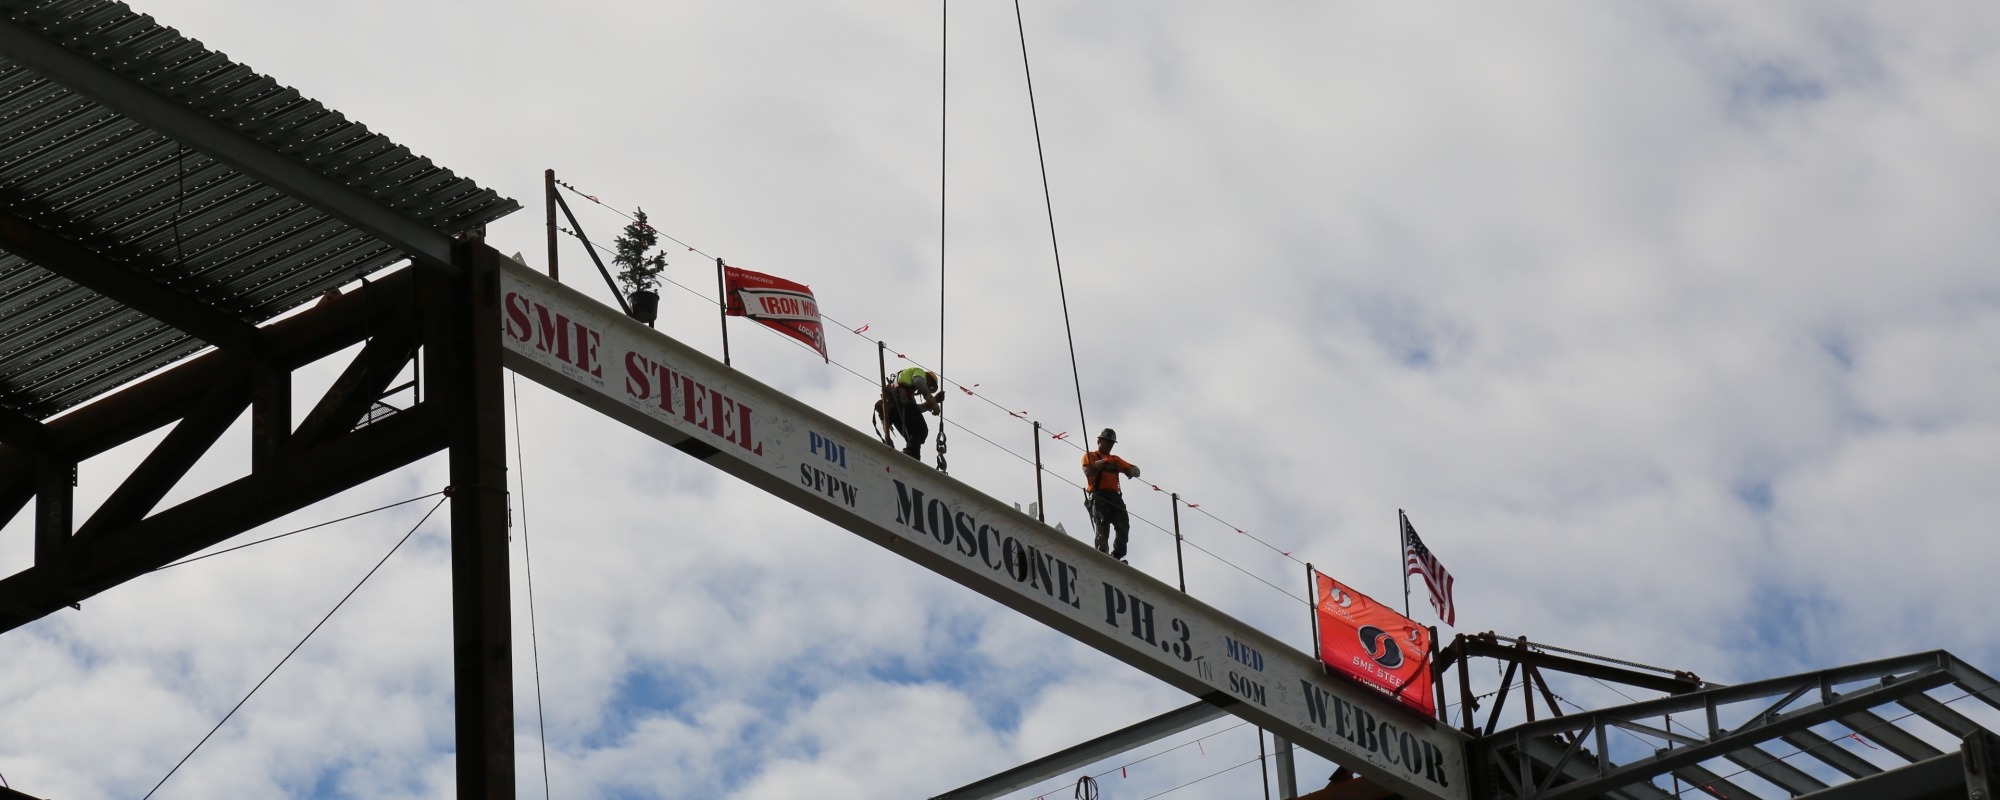 last beam to be raised for Moscone Expansion Project